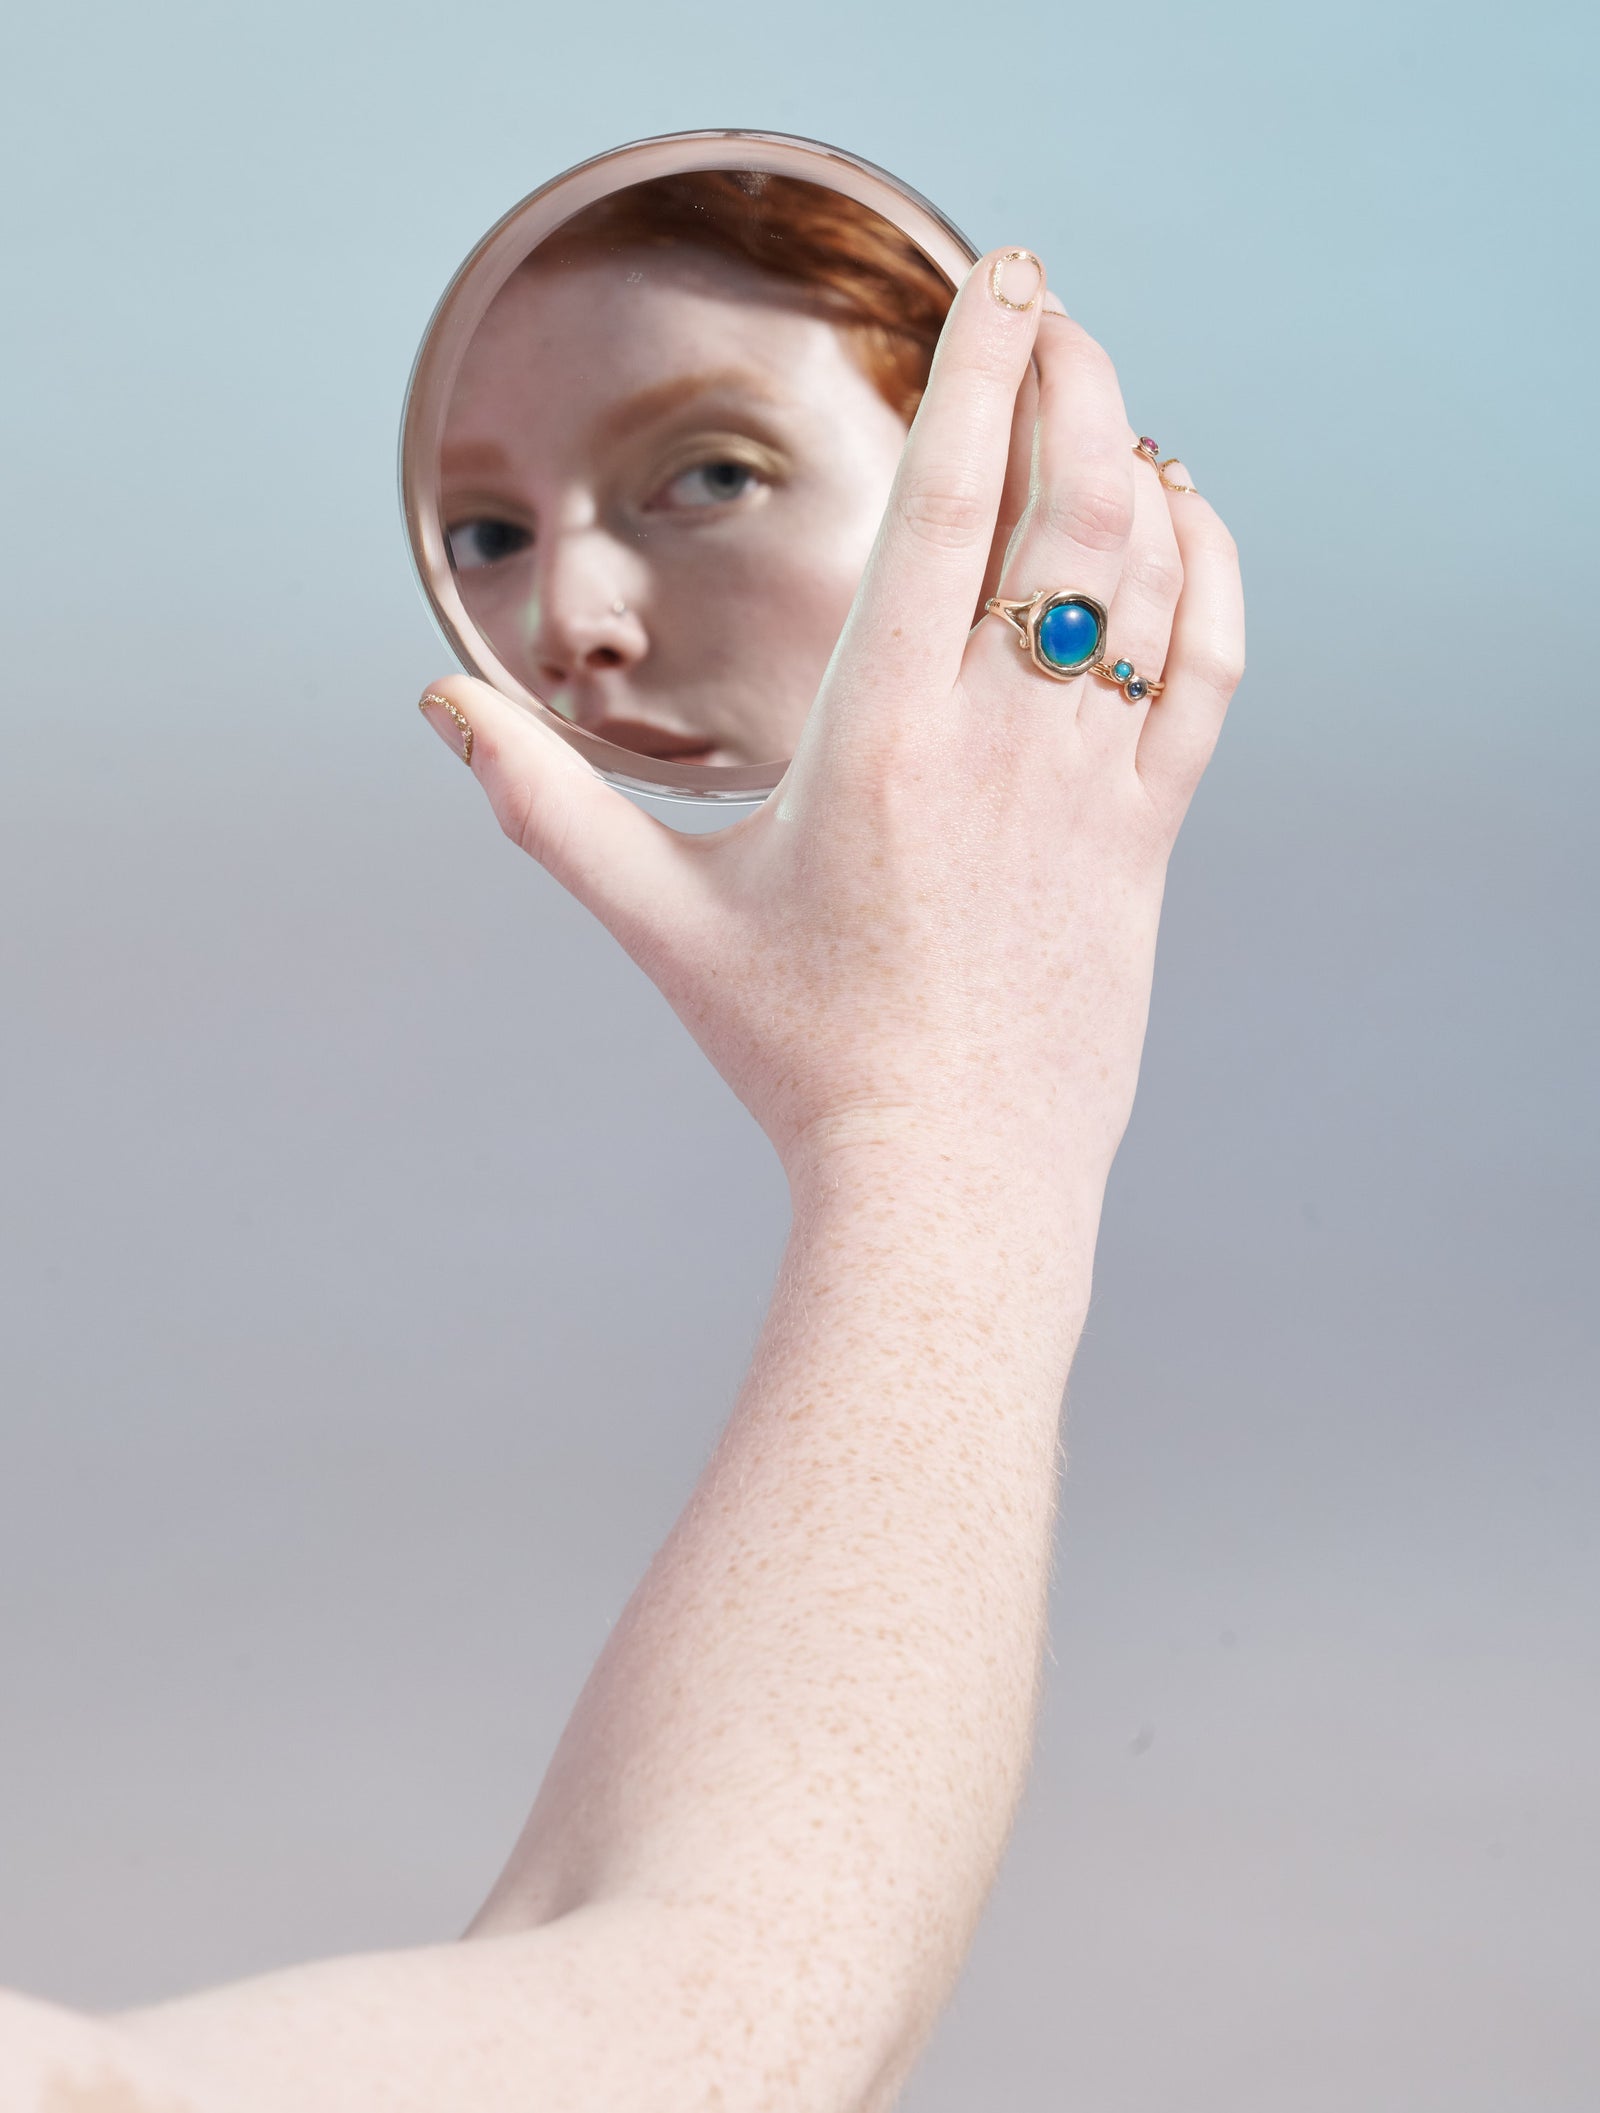 Colour-Changing Mood Ring 'Expressions of Self'